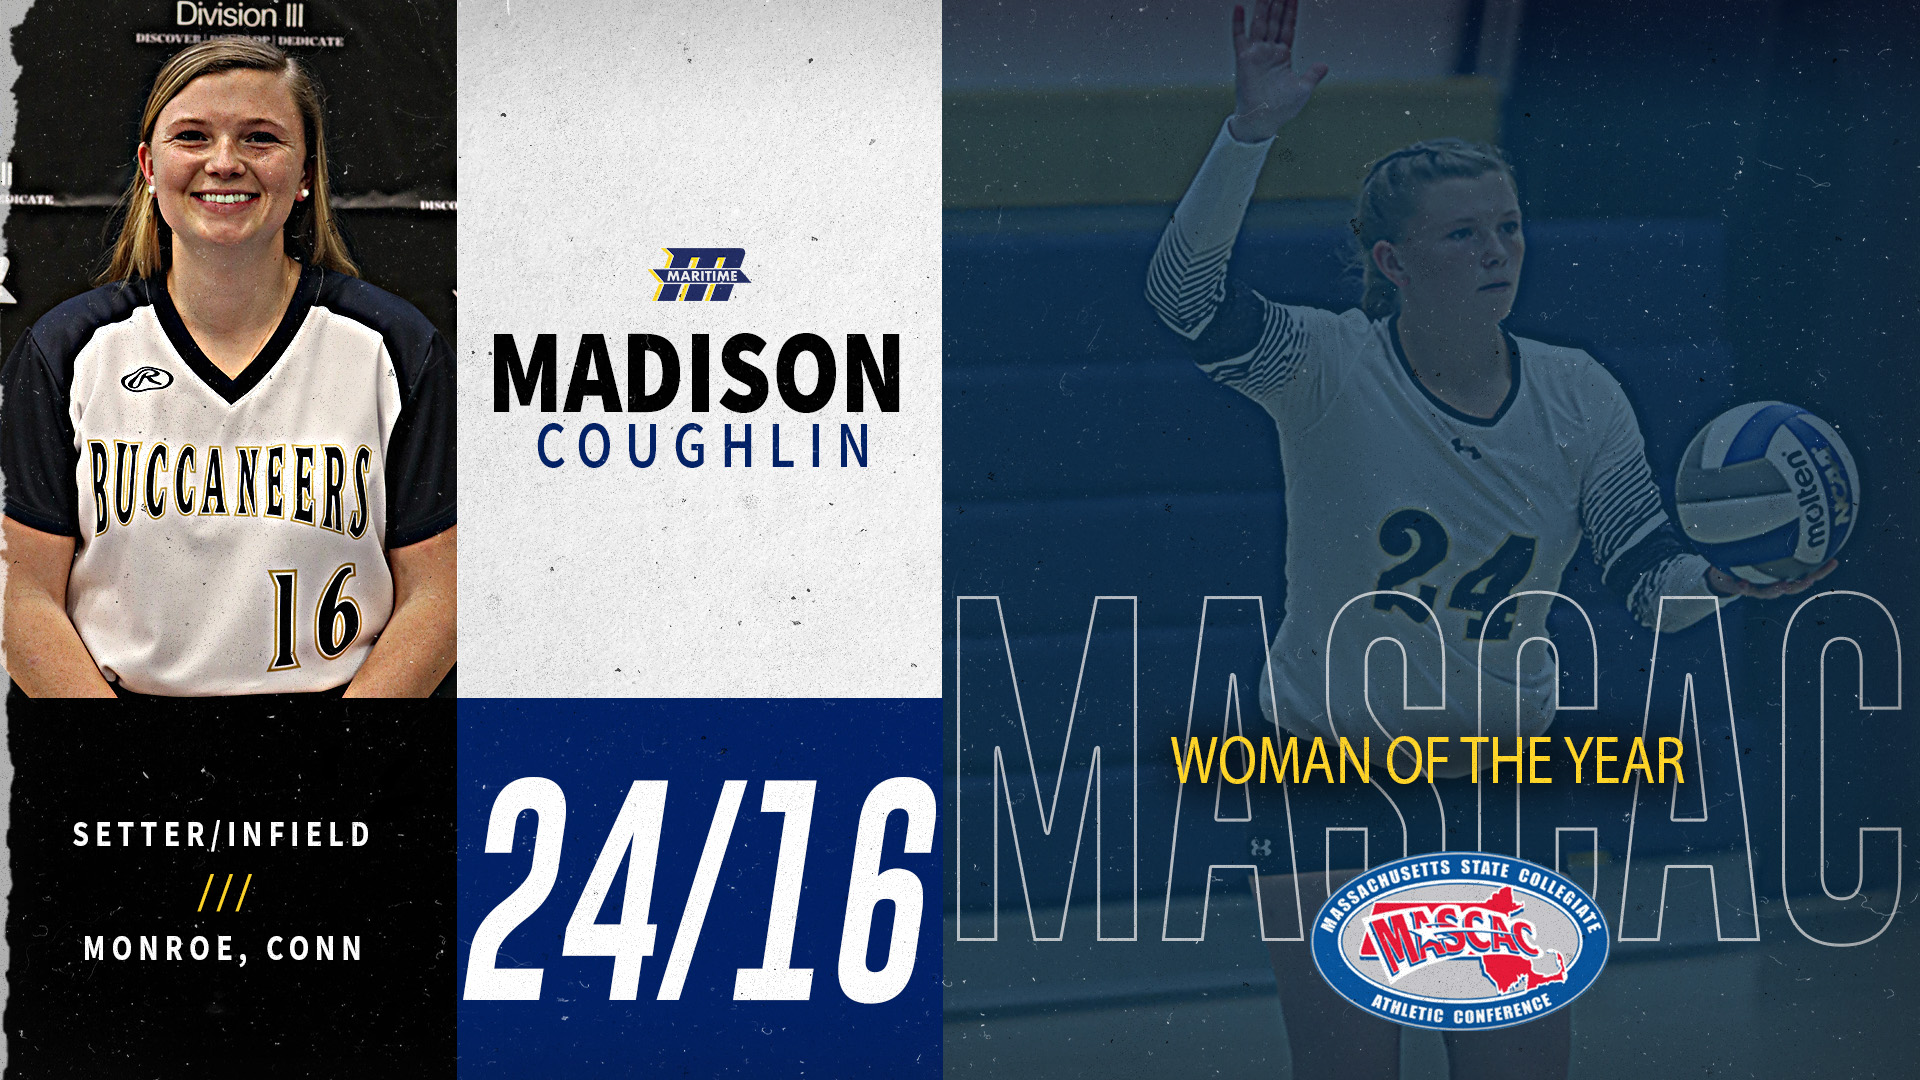 Coughlin Named MASCAC Woman of the Year / NCAA WOTY Nominee